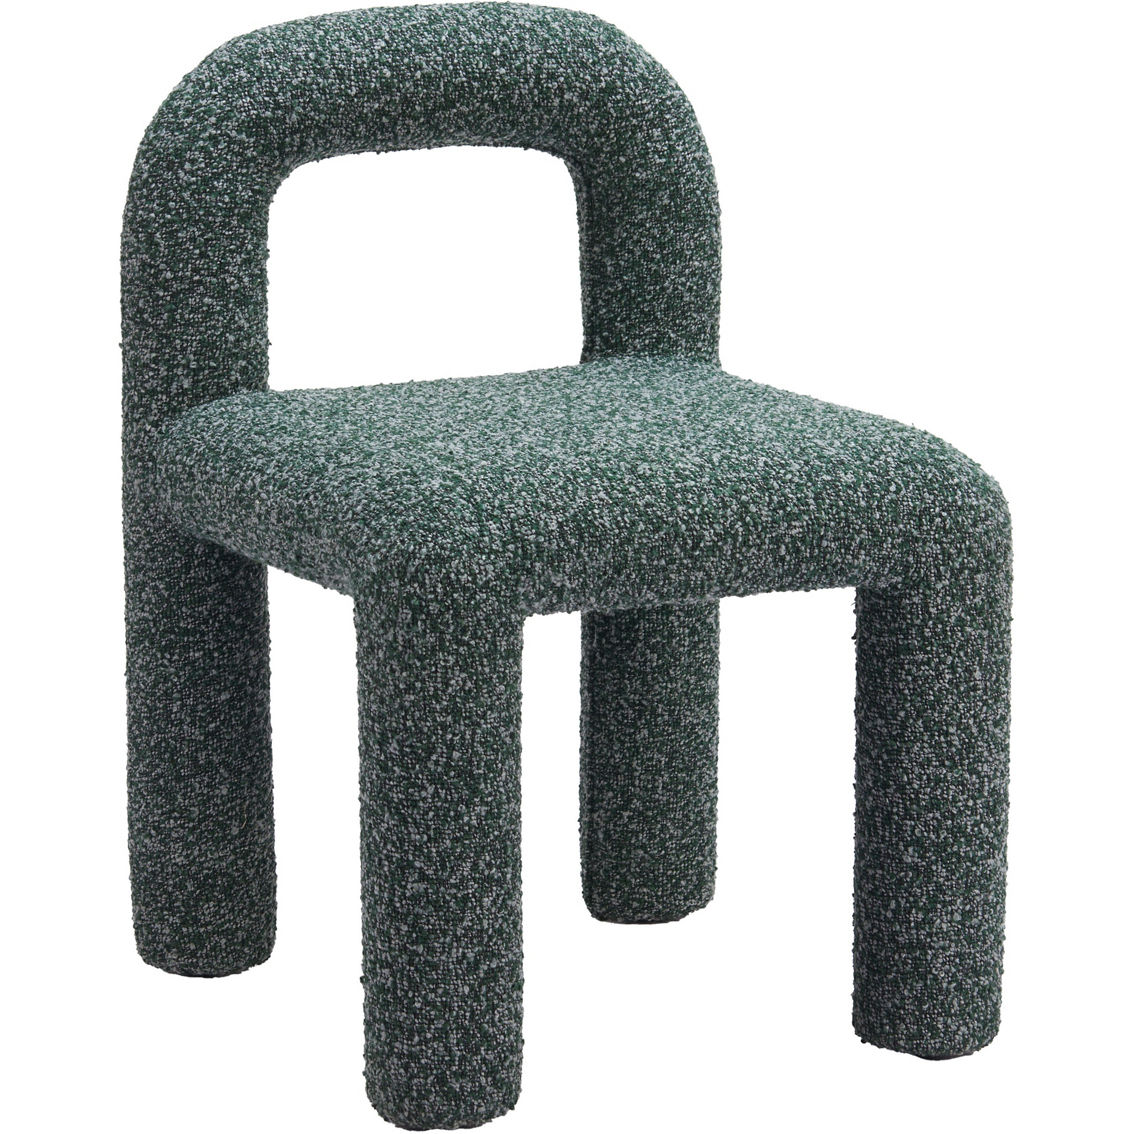 Zuo Modern Arum Dining Chairs Snowy Green 2 pk. - Image 2 of 8